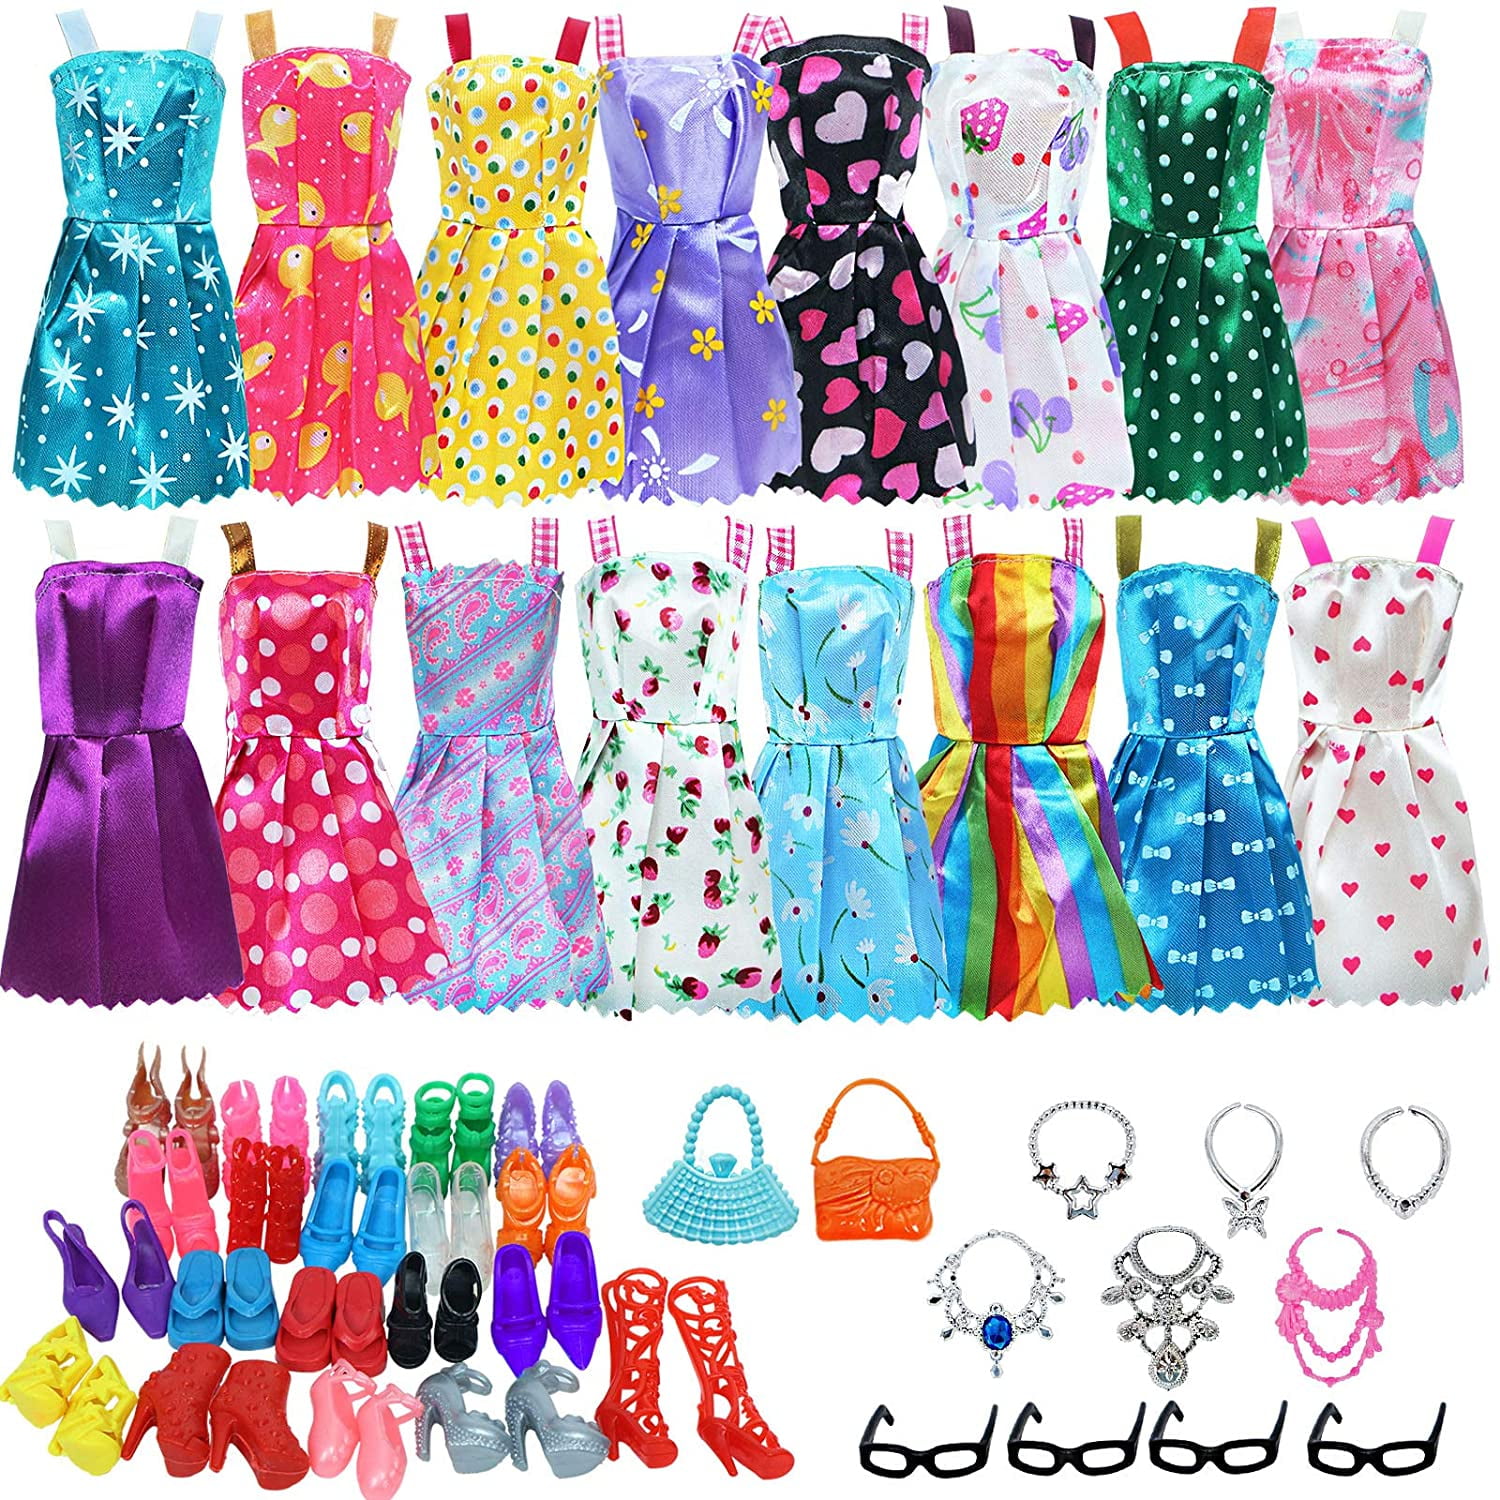 Handmade Party Gown Princess Costume for Barbie Fashionistas Dolls Girl Toys 5pcs Dress 12 Pairs Shoes